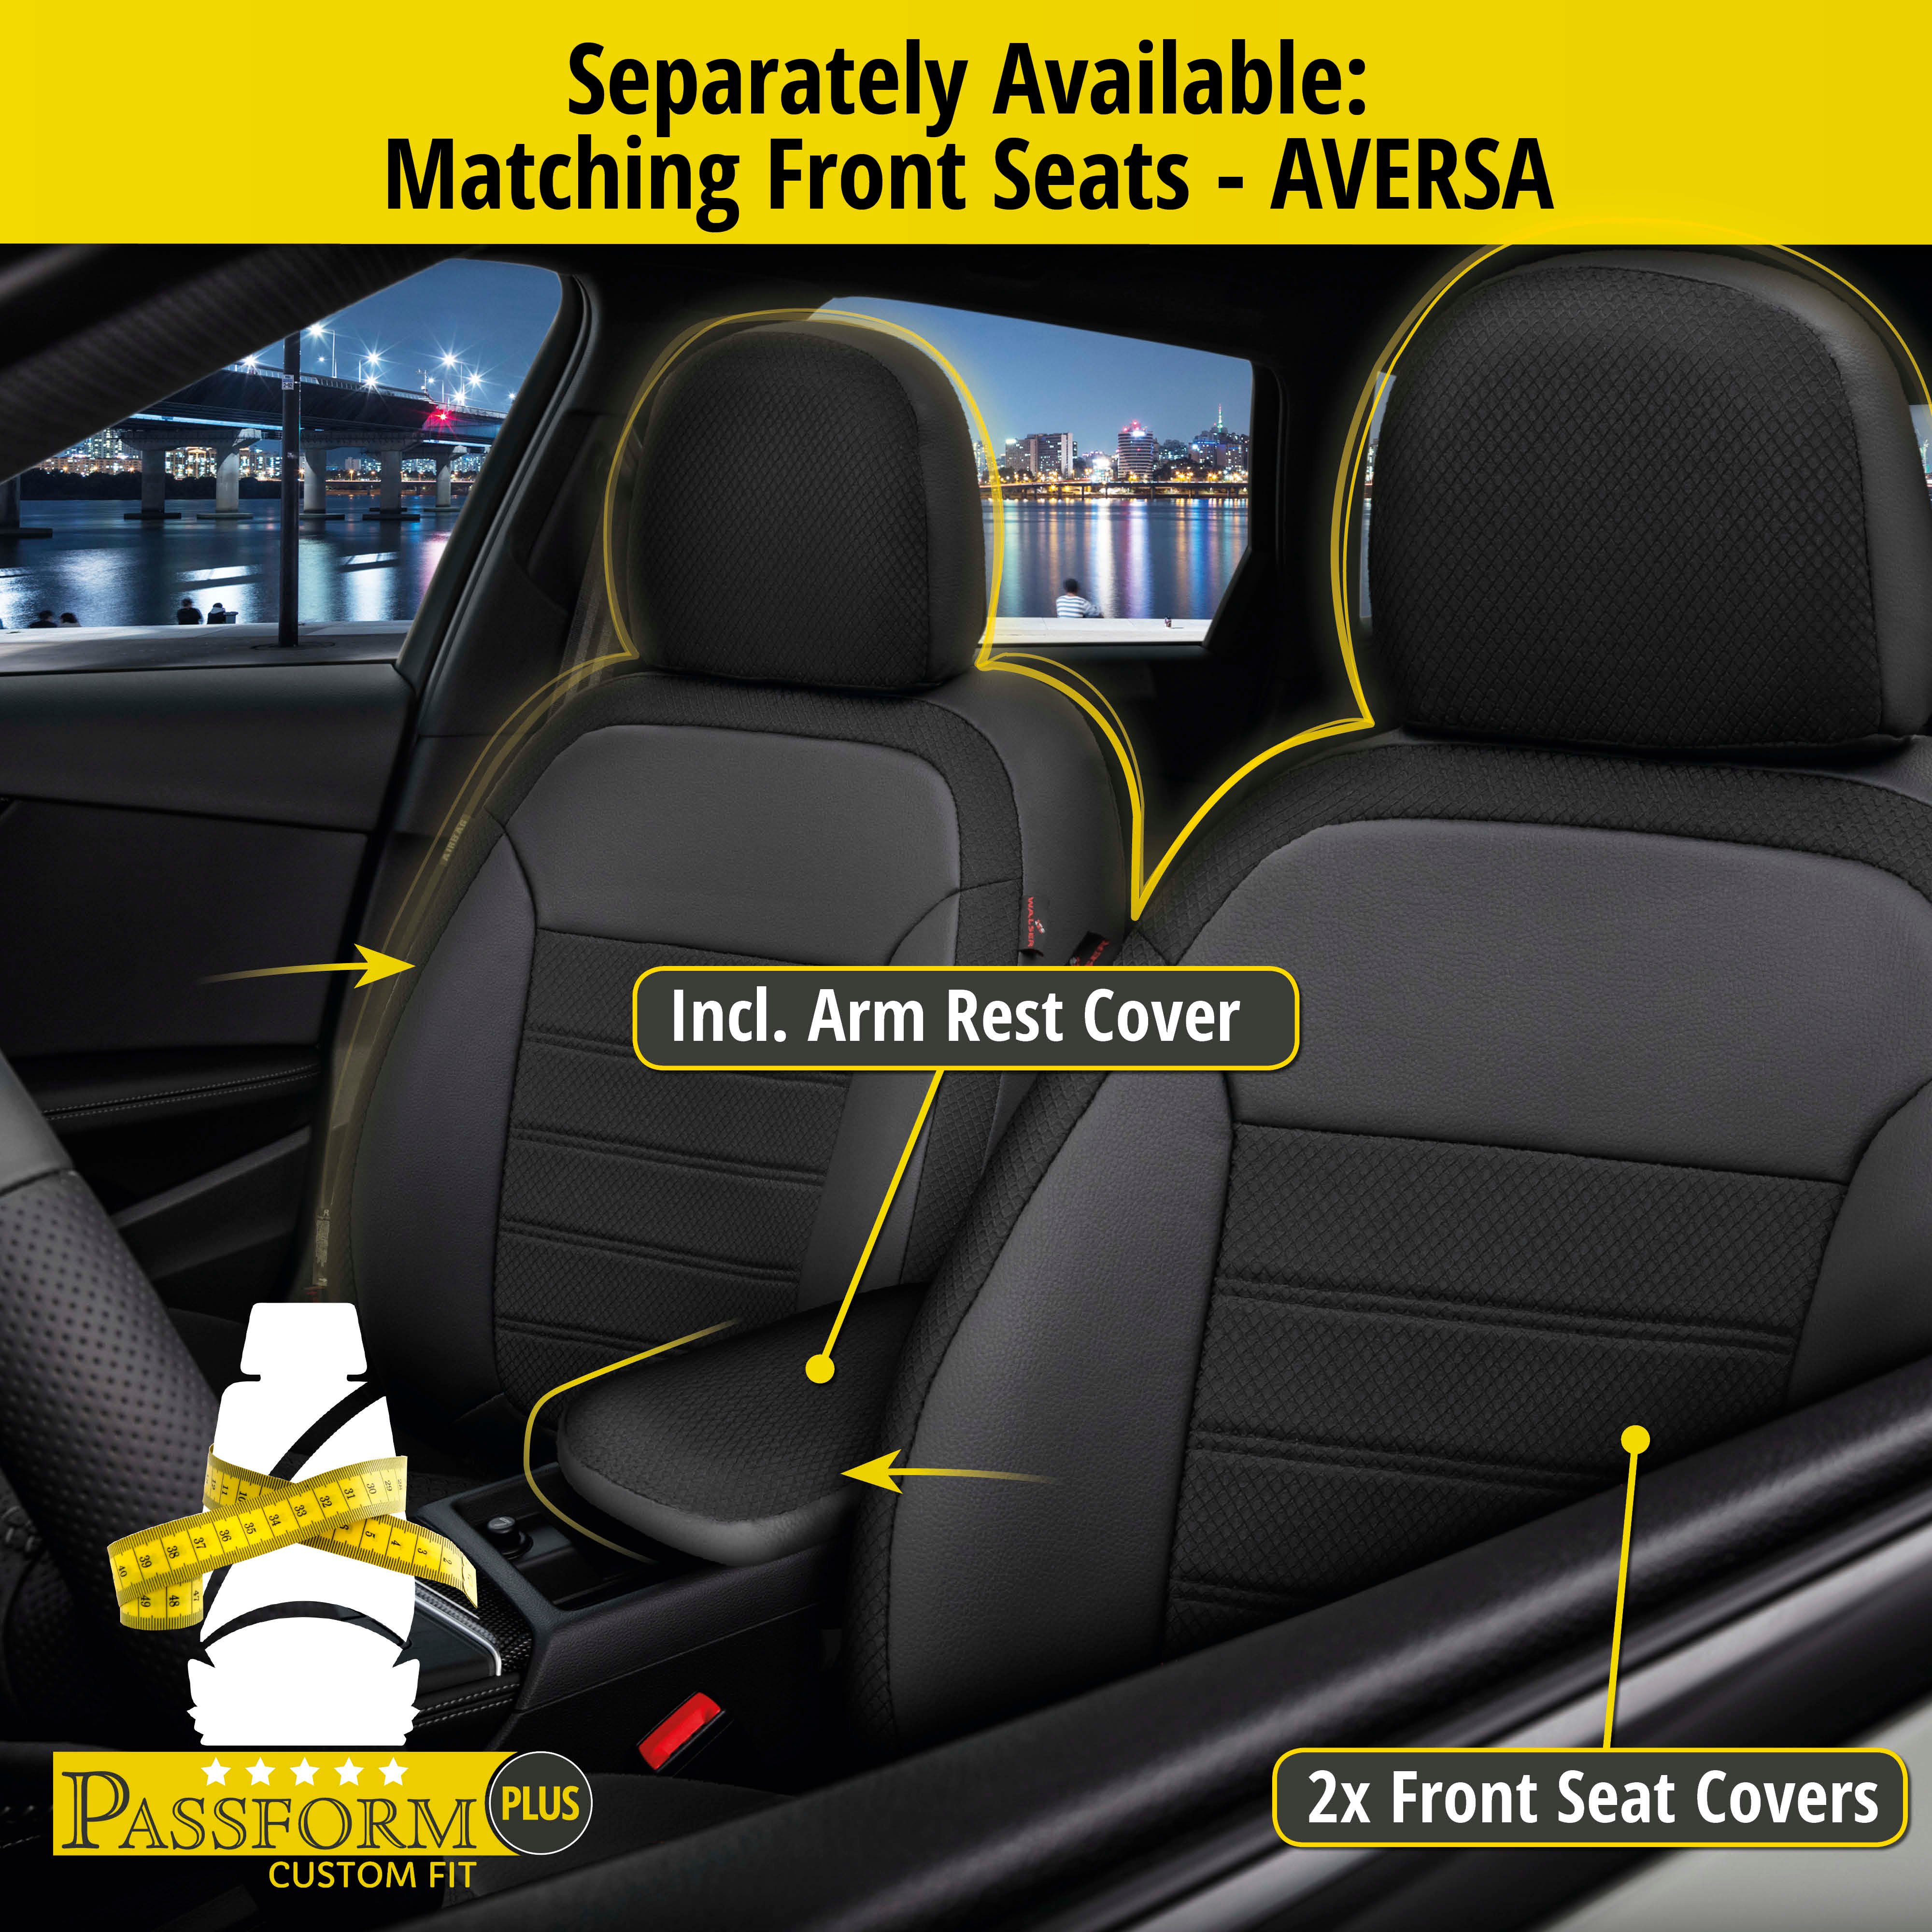 Seat Cover Aversa for Audi A3 (8P1) 05/2003-12/2013, 1 rear seat cover for sport seats